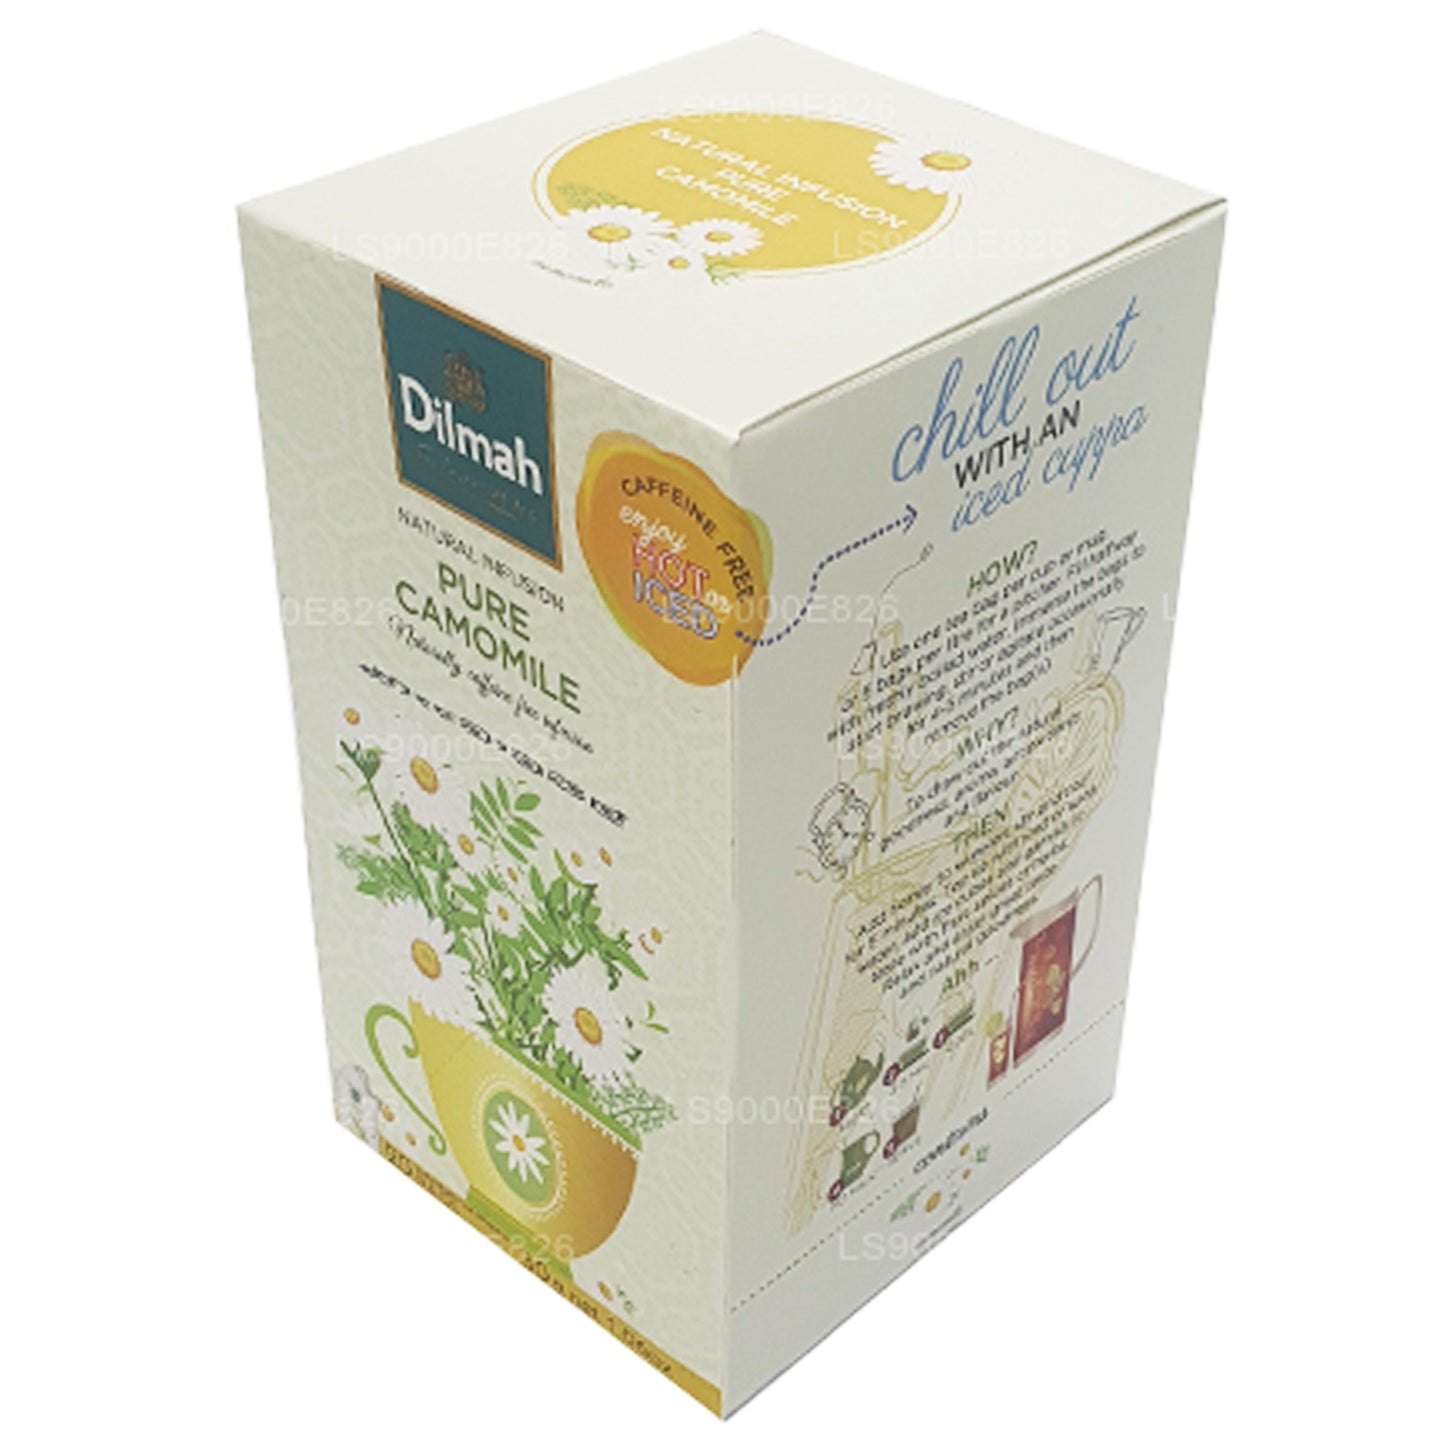 Dilmah Pure Camomile Flowers (30g) 20 个茶包